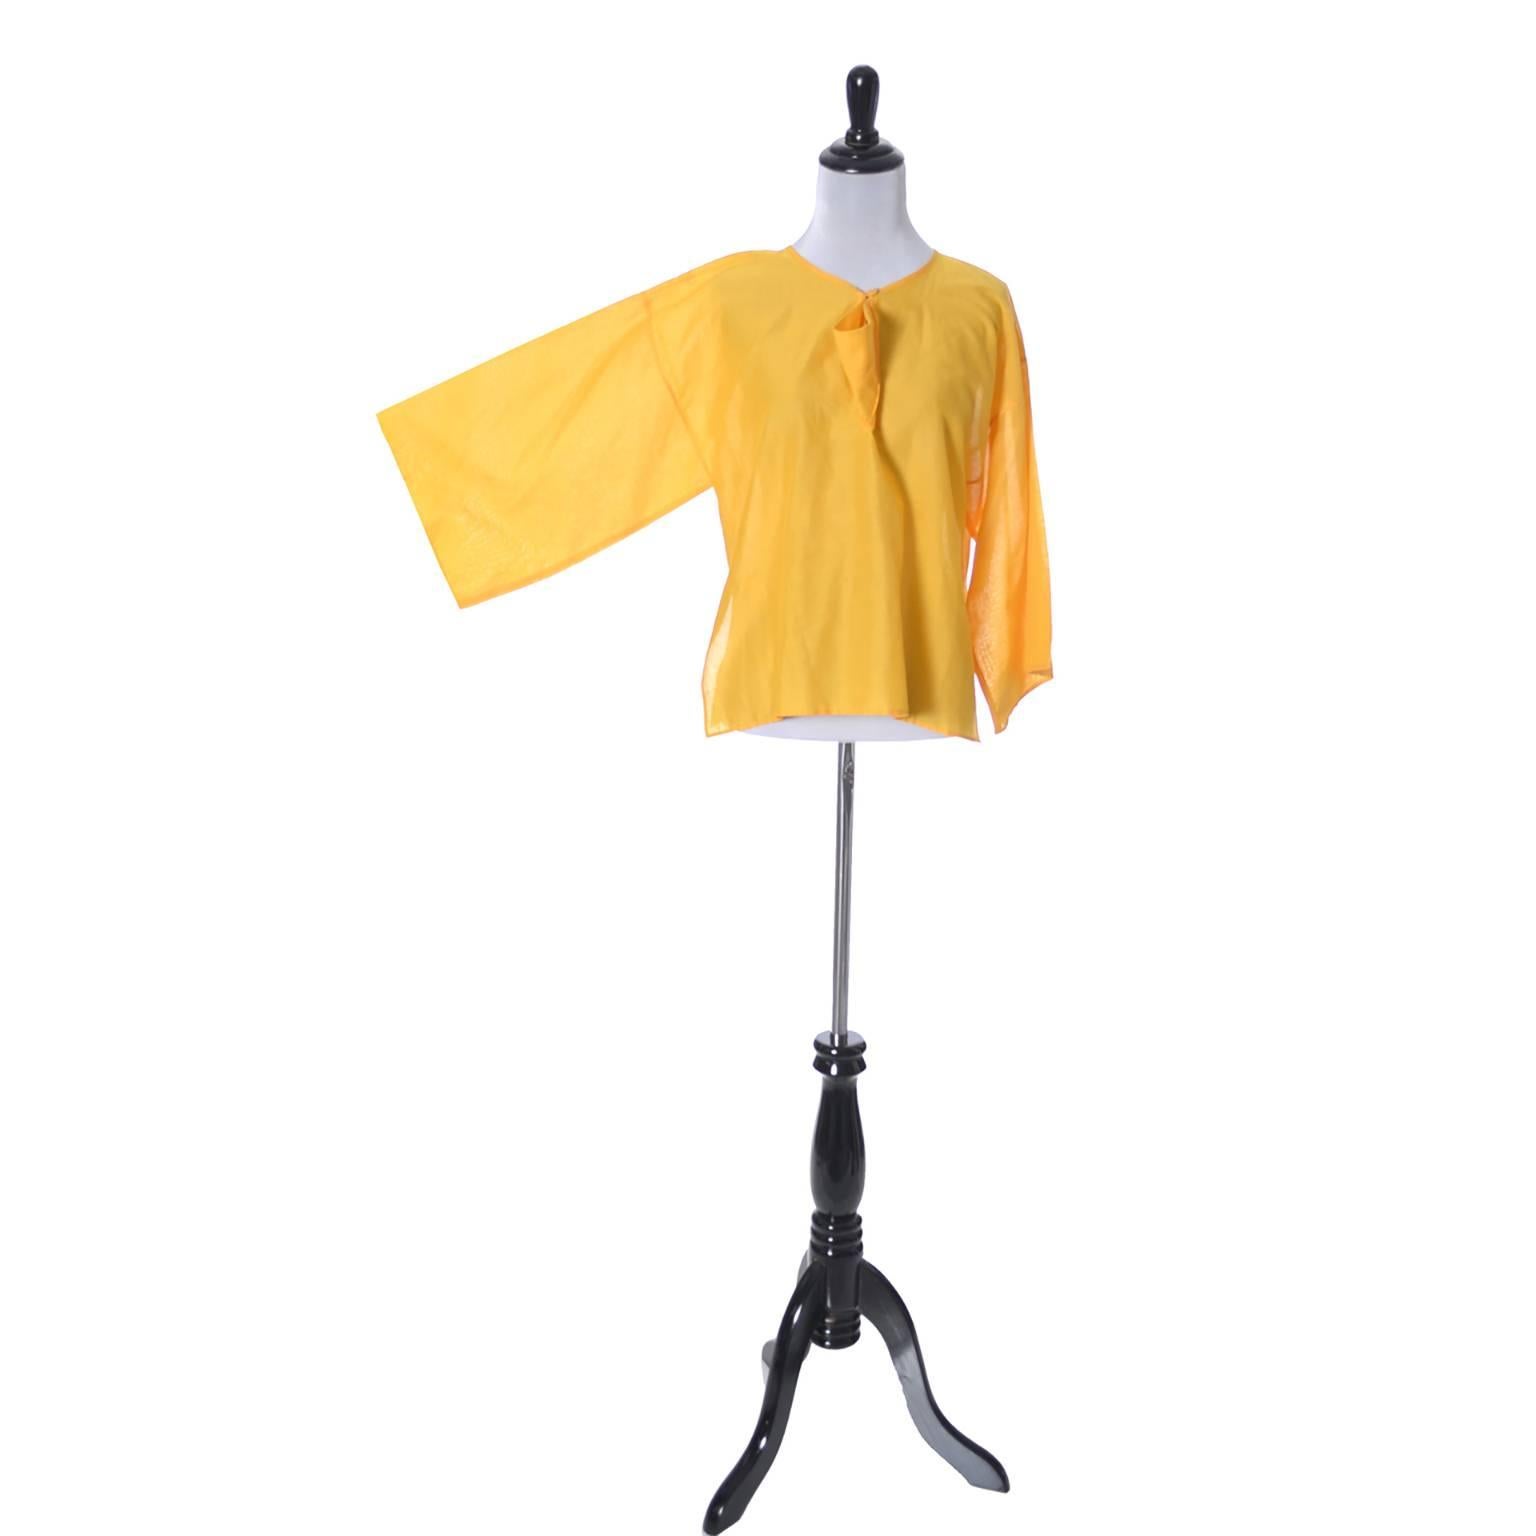 This vintage 1970's citrus yellow orange cotton boxy top has fabulous kimono style sleeves and was designed by Jean Charles de Castelbajac for Ko and Co.  This beautifully designed vintage blouse is in excellent condition and was purchased at Henri